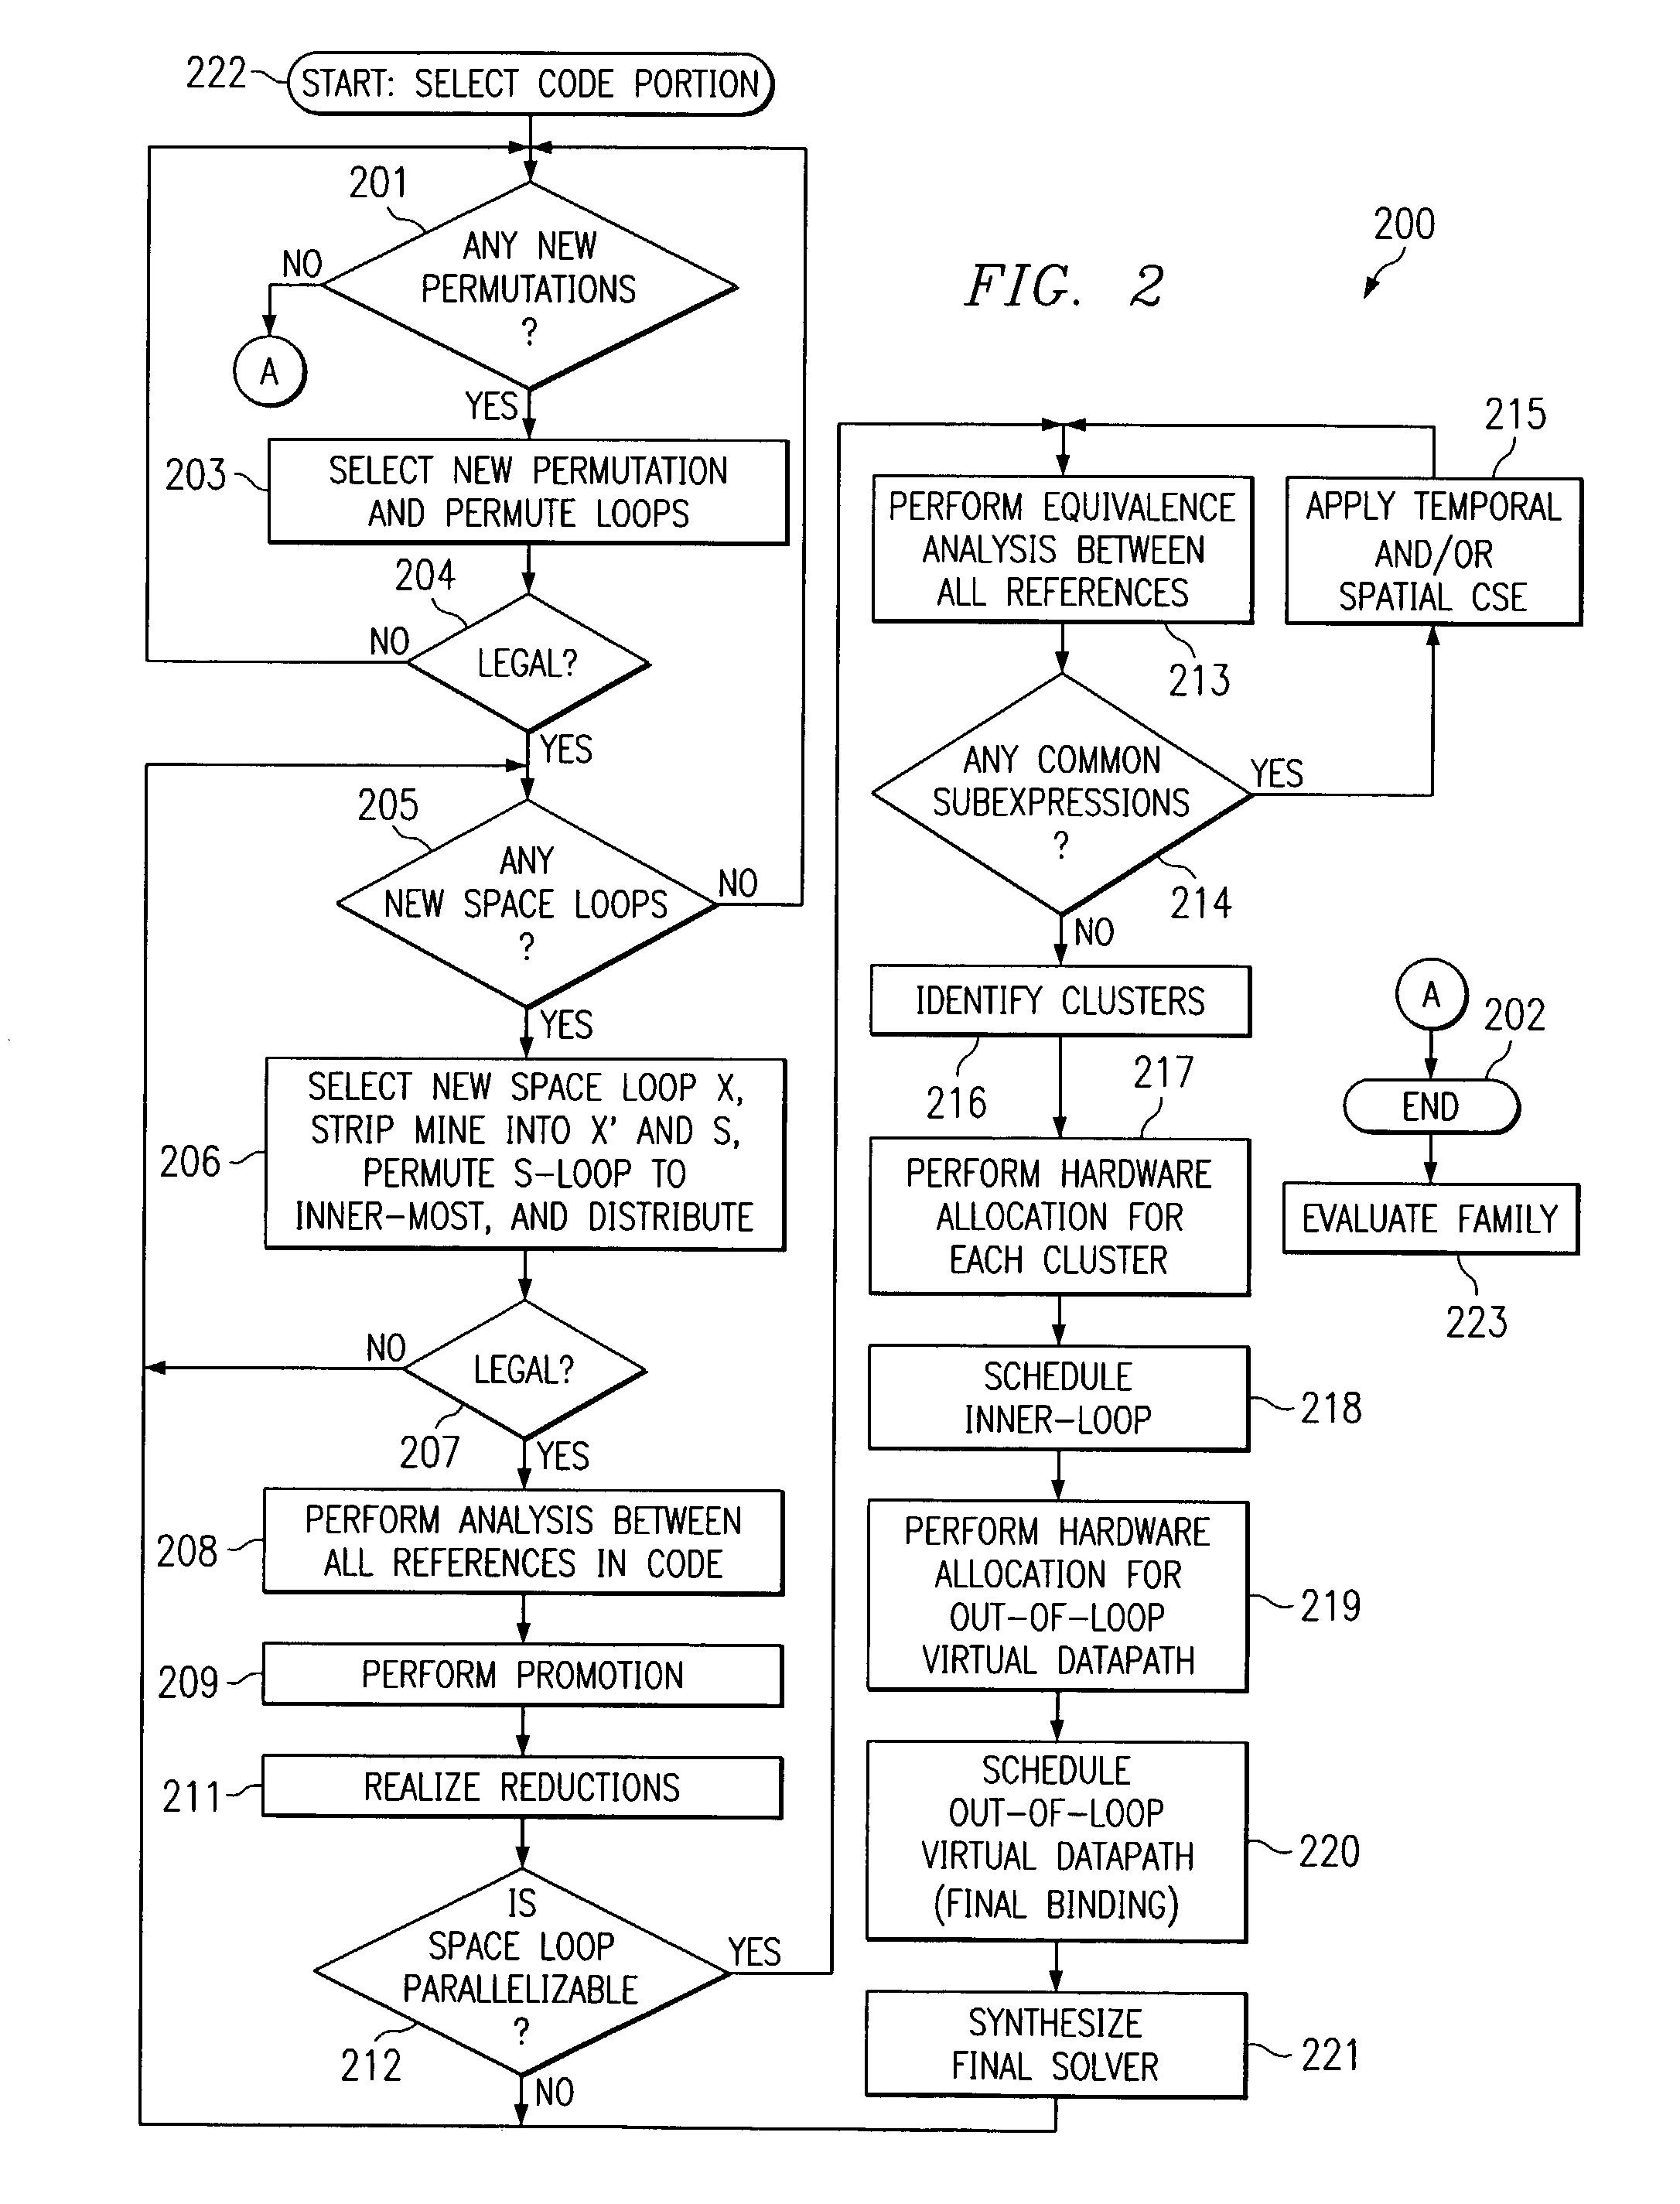 System and method for creating systolic solvers